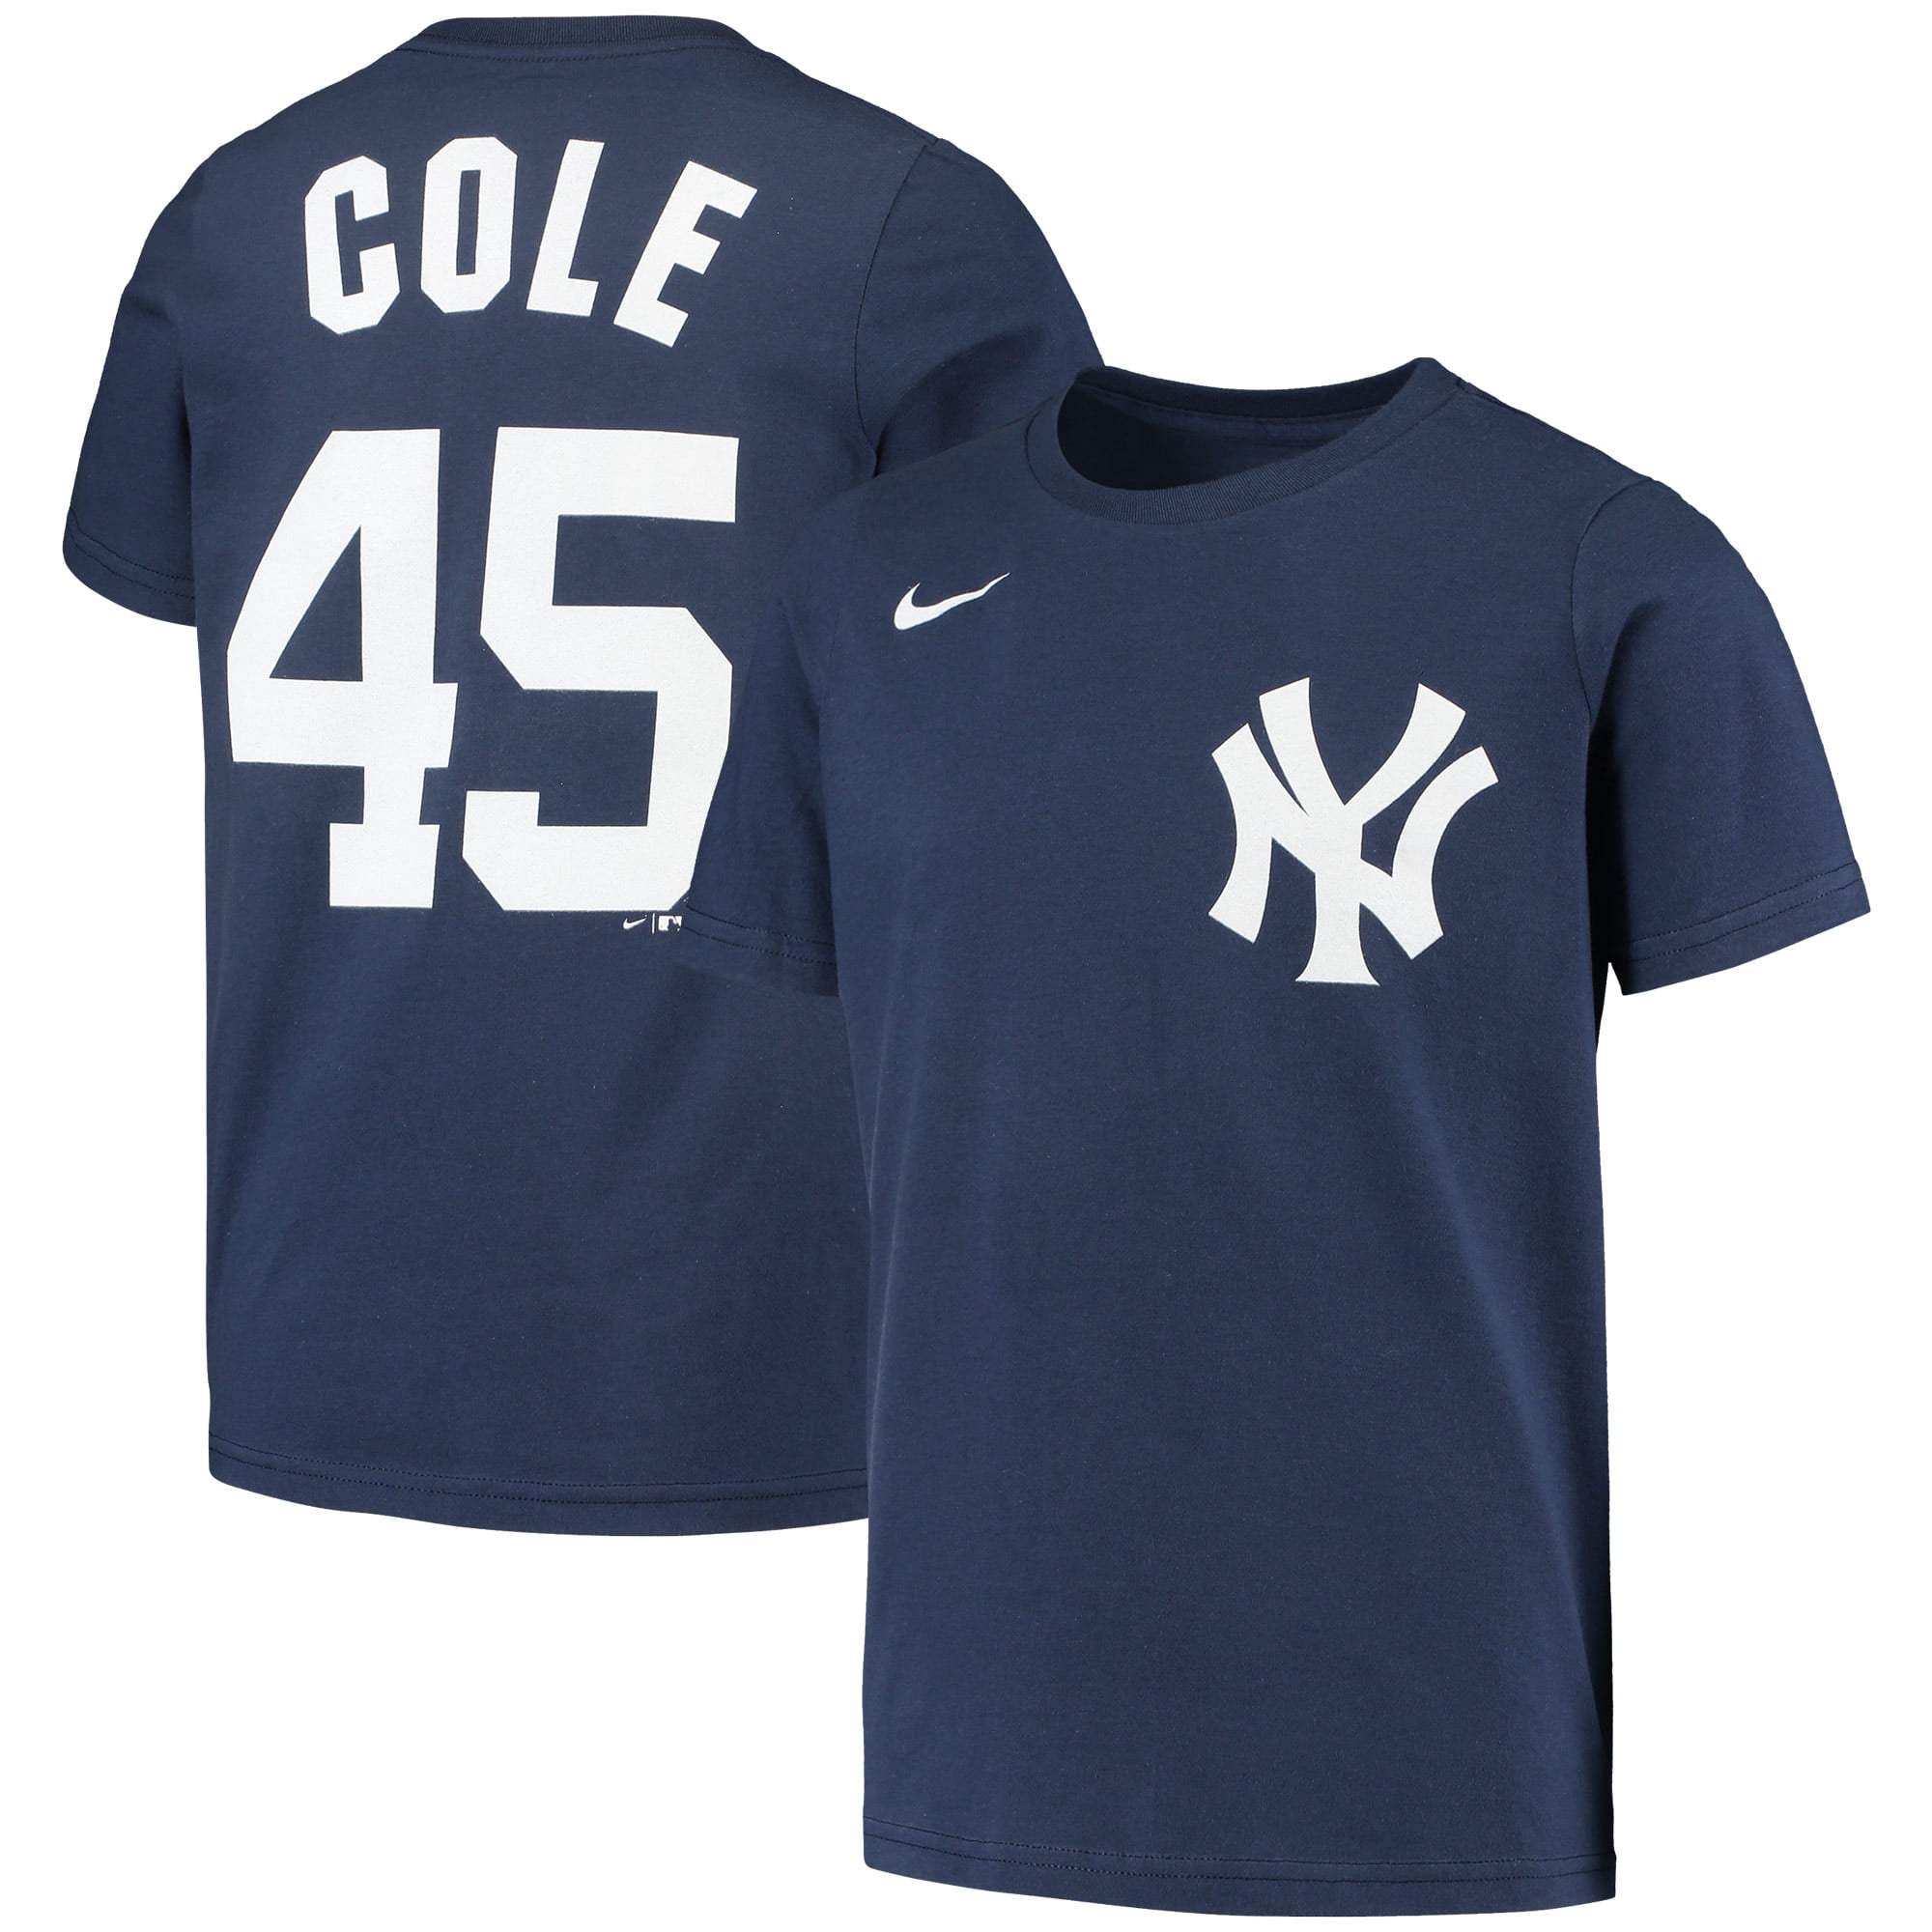 Youth Gerrit Cole Navy New York Yankees Player T-Shirt Size: Large